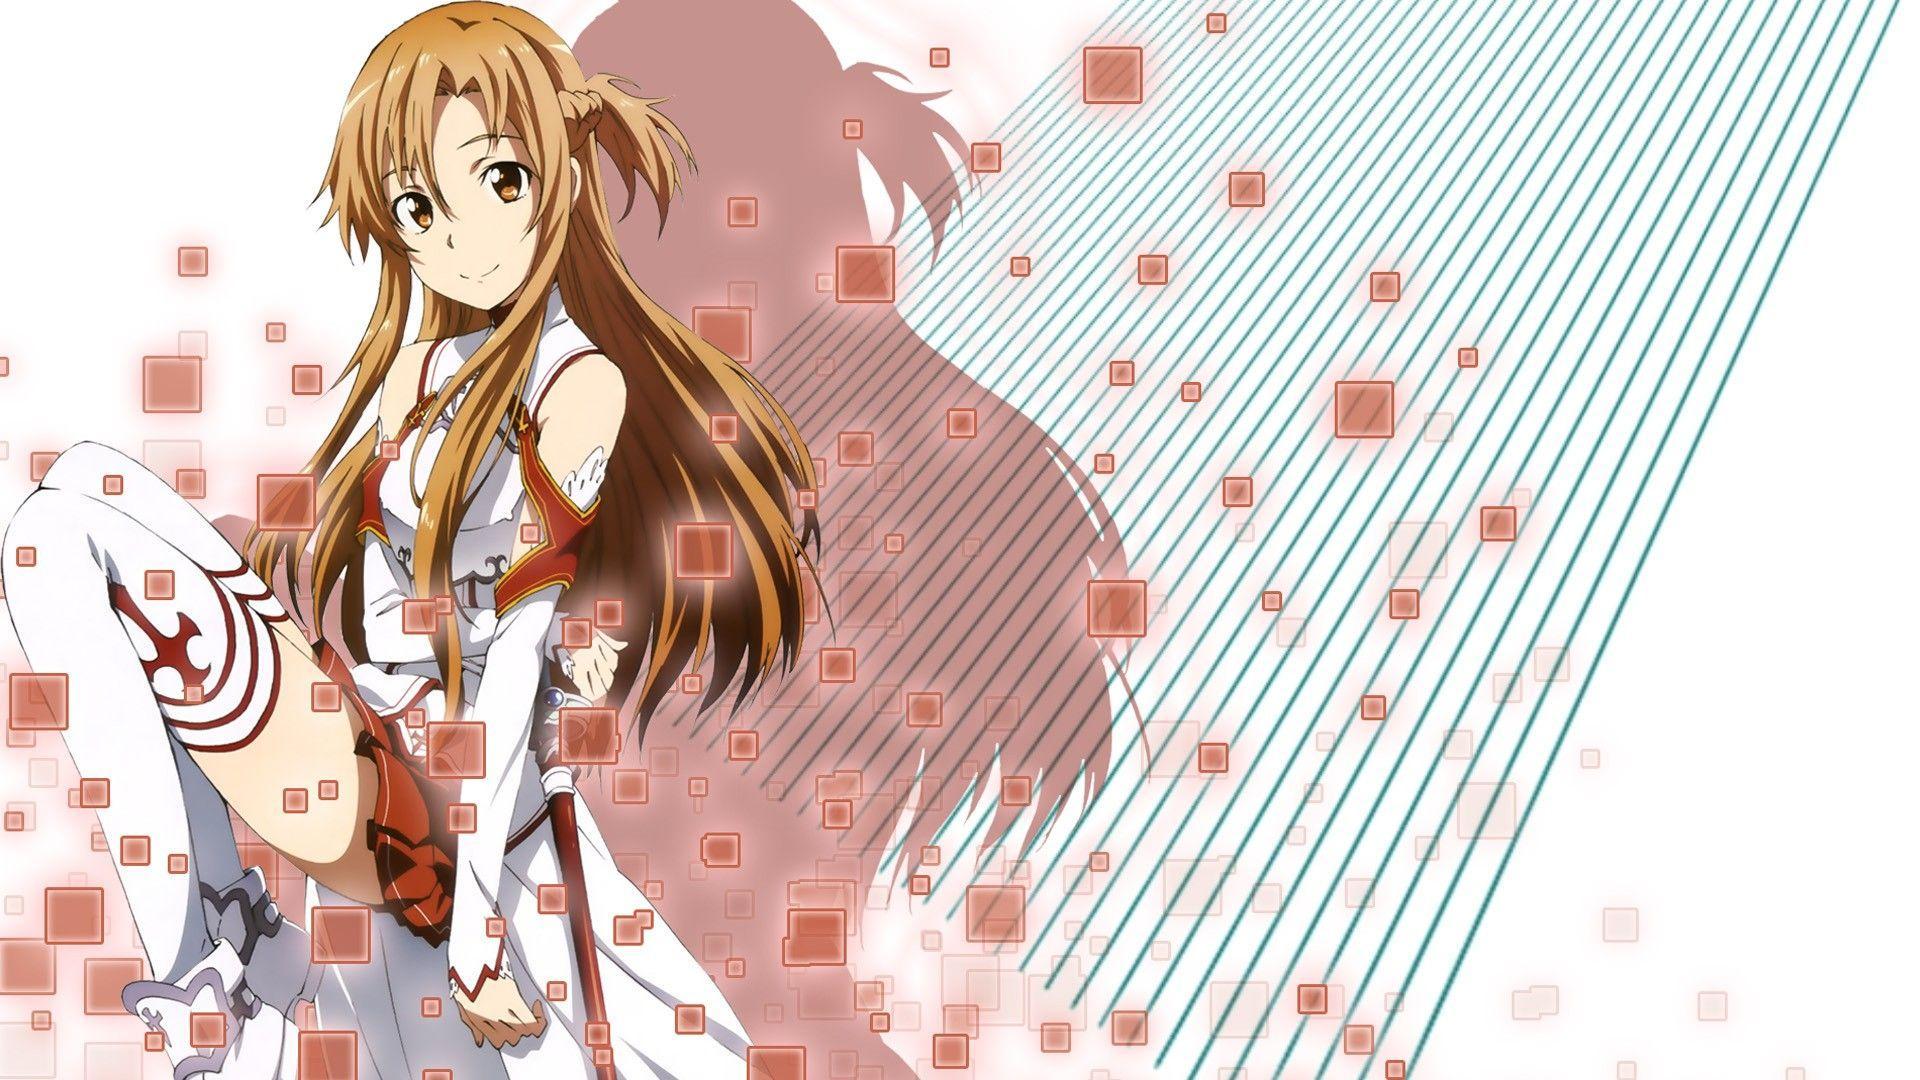 Free asuna wallpapers and asuna backgrounds for your computer desktop. 